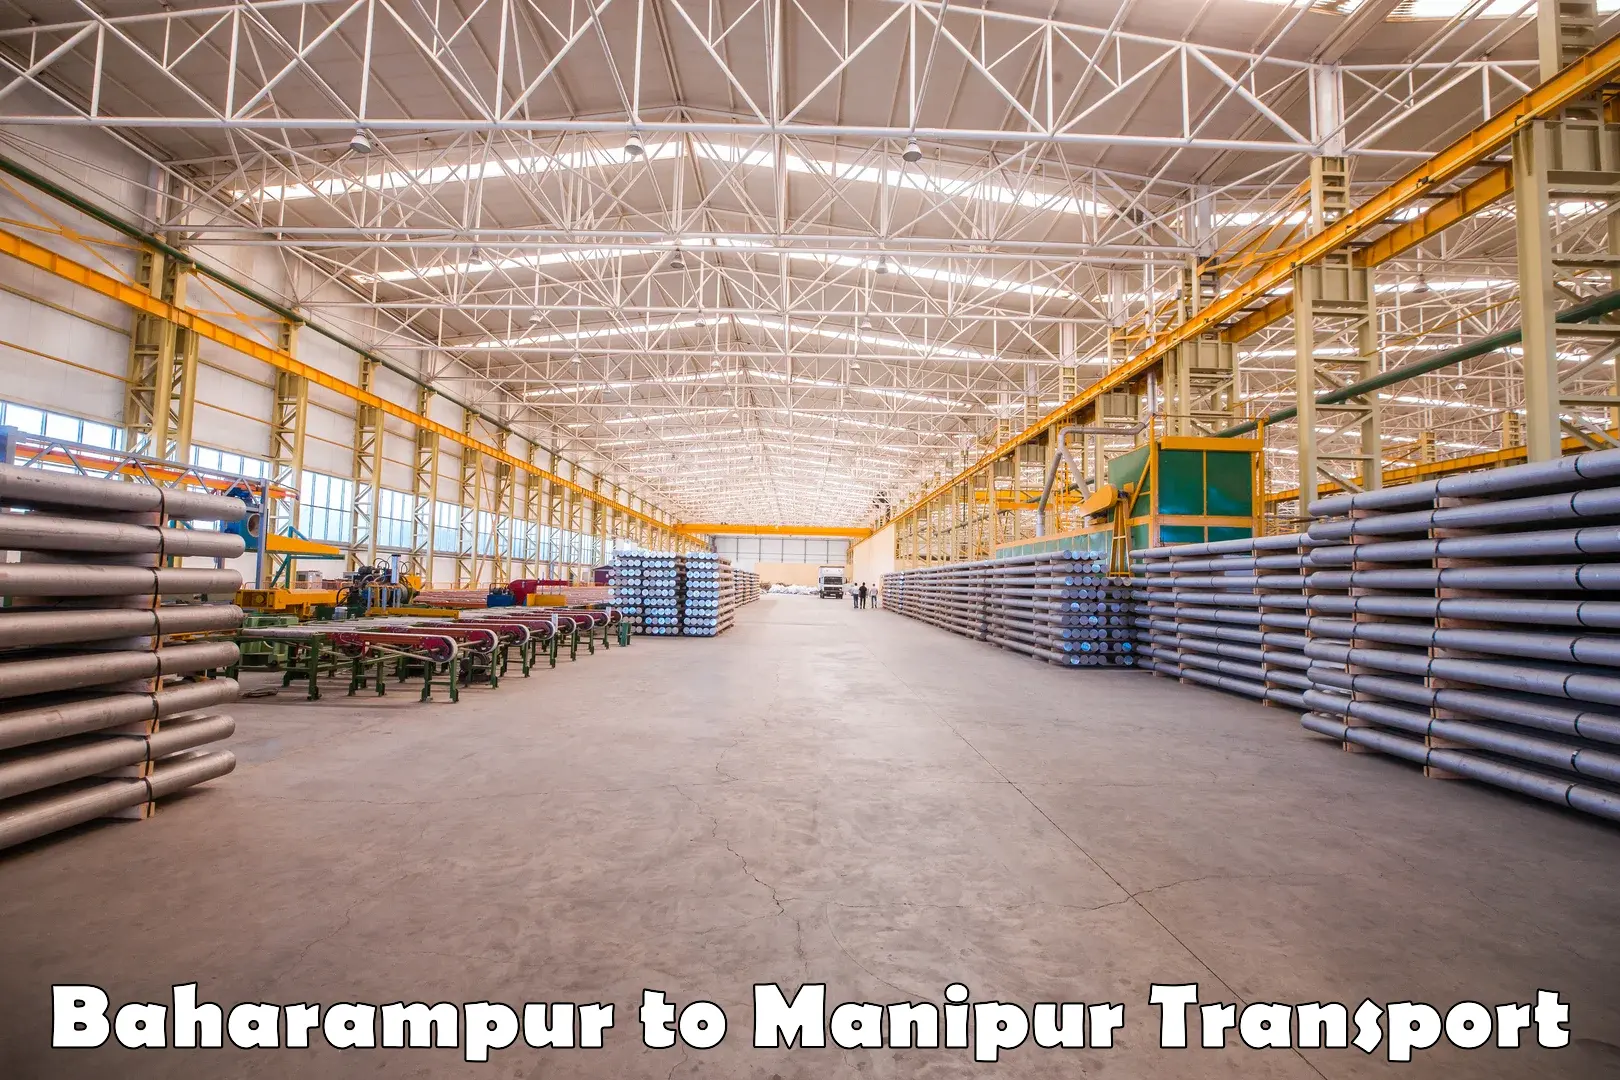 Nearby transport service Baharampur to Manipur